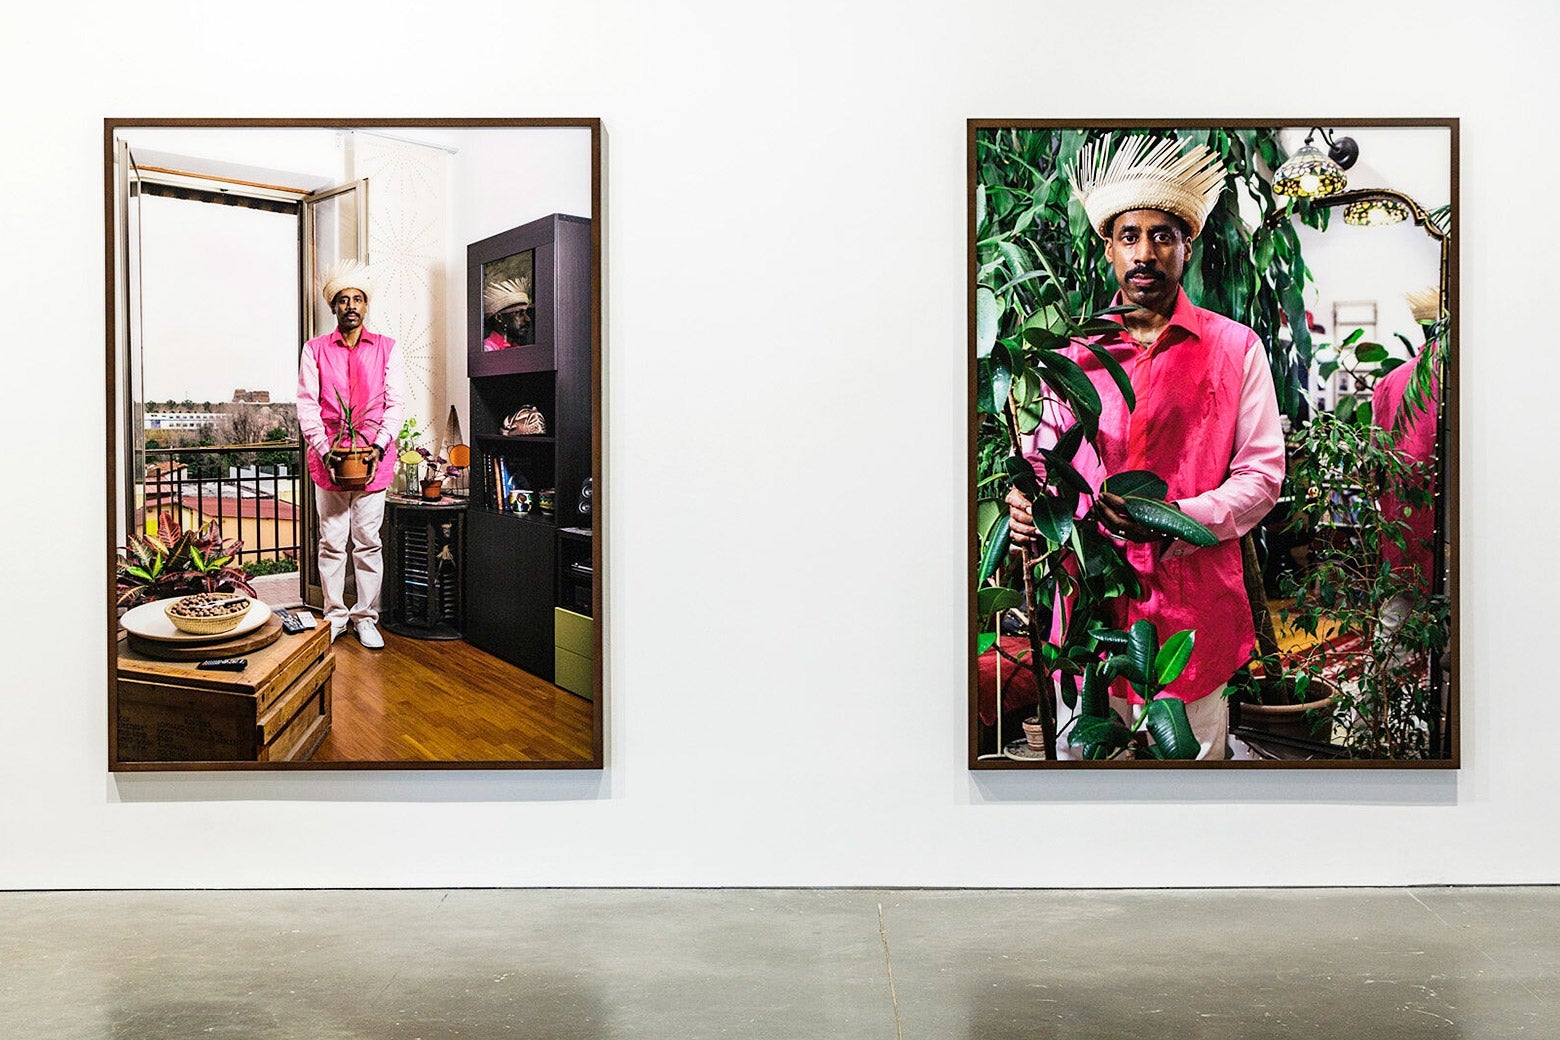 Two photos depicting a man in his home and amongst plants in Nari Ward's Sun Splashed exhibition at ICA Boston.